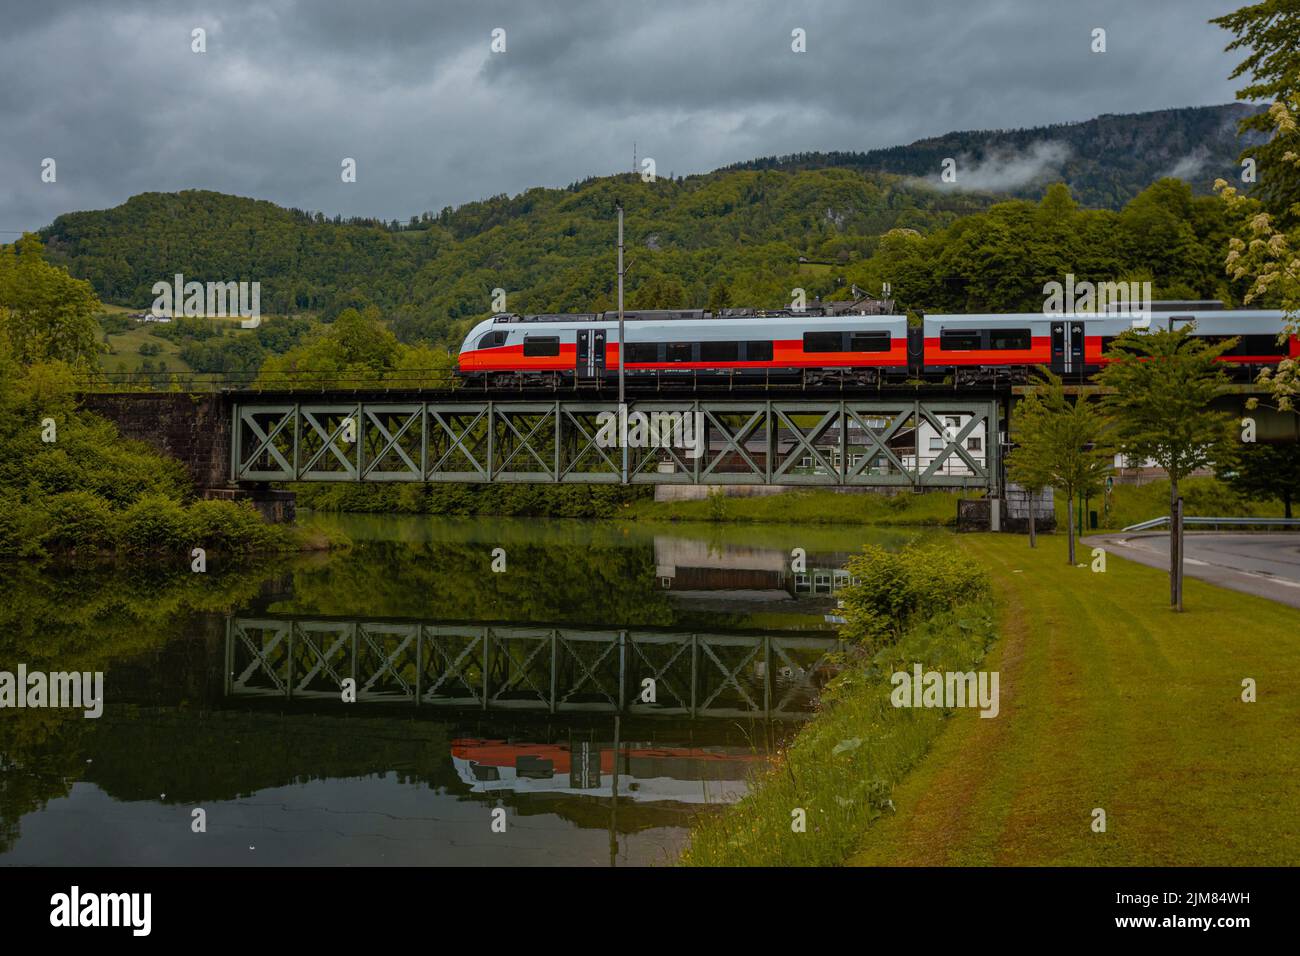 Modern train running over metal trestle bridge at Reichraming, Austria. Nice reflection in the water below. Cloudy day but with lots of color. Stock Photo